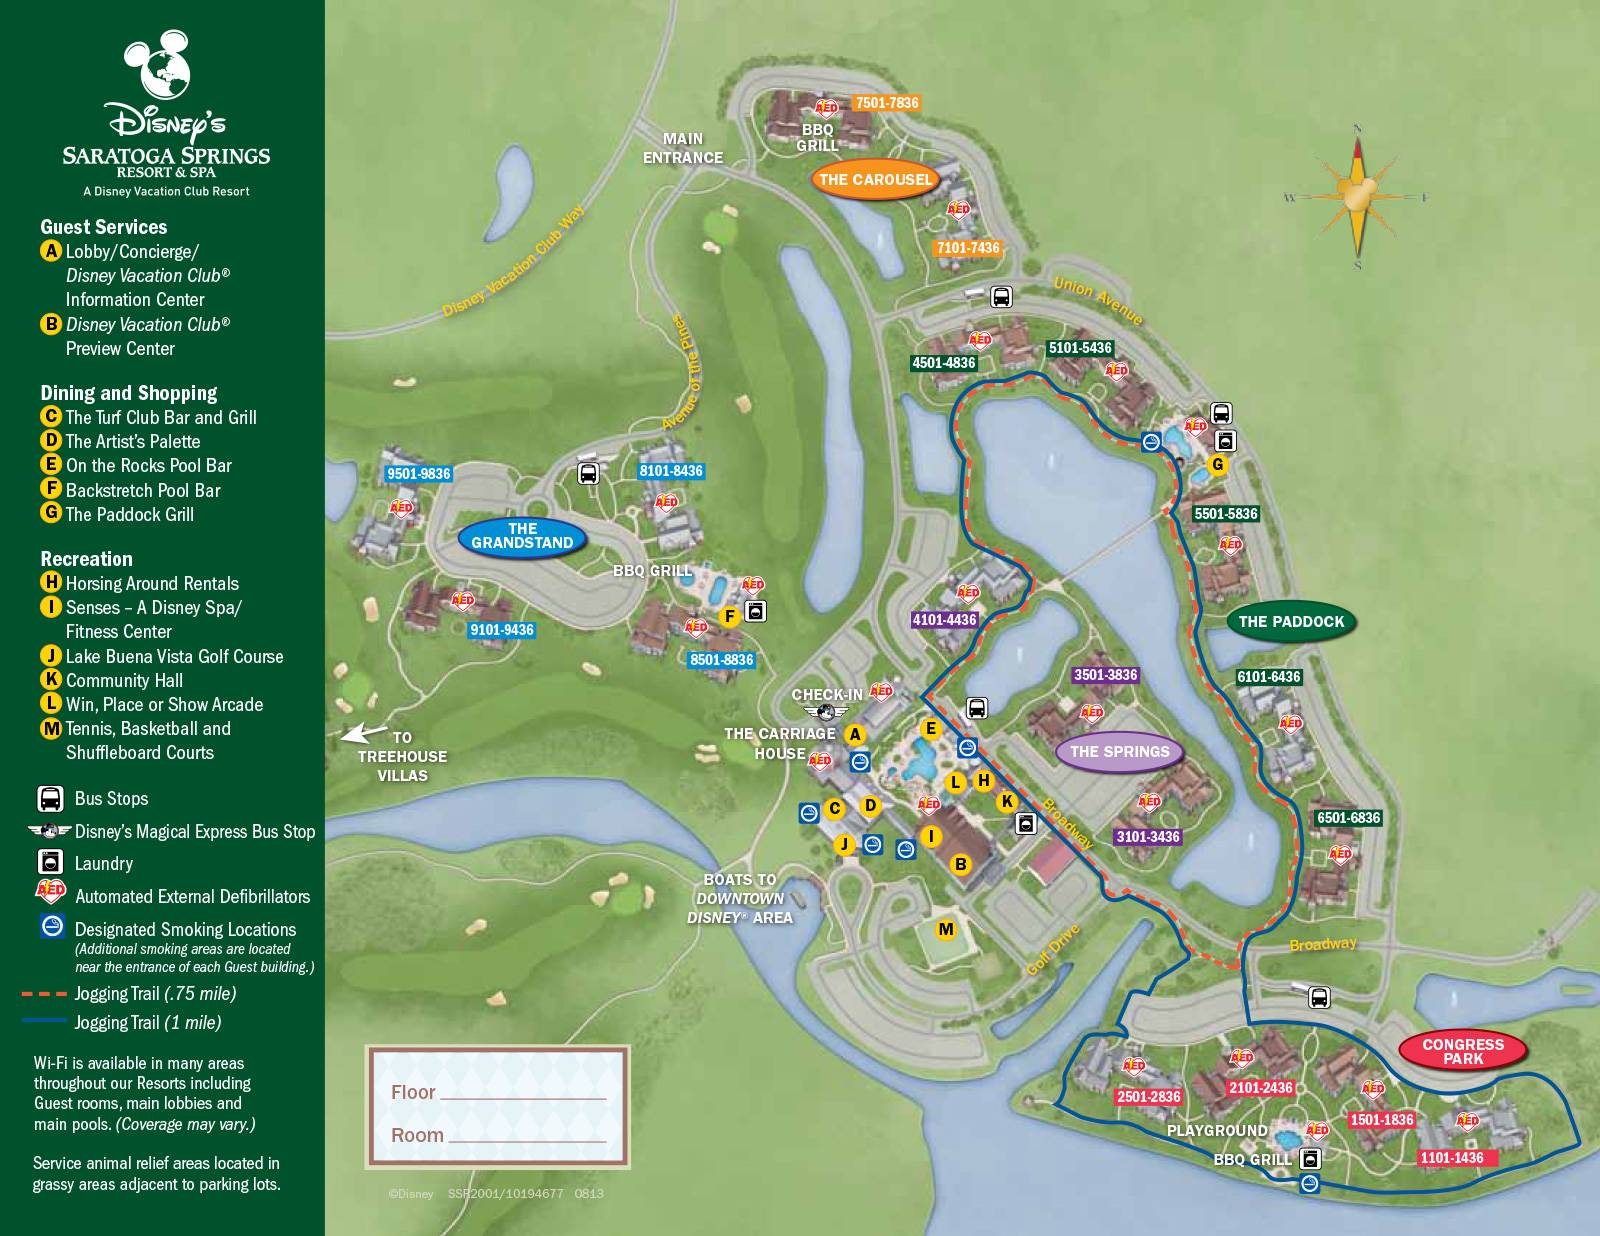 2013 Saratoga Springs guide map